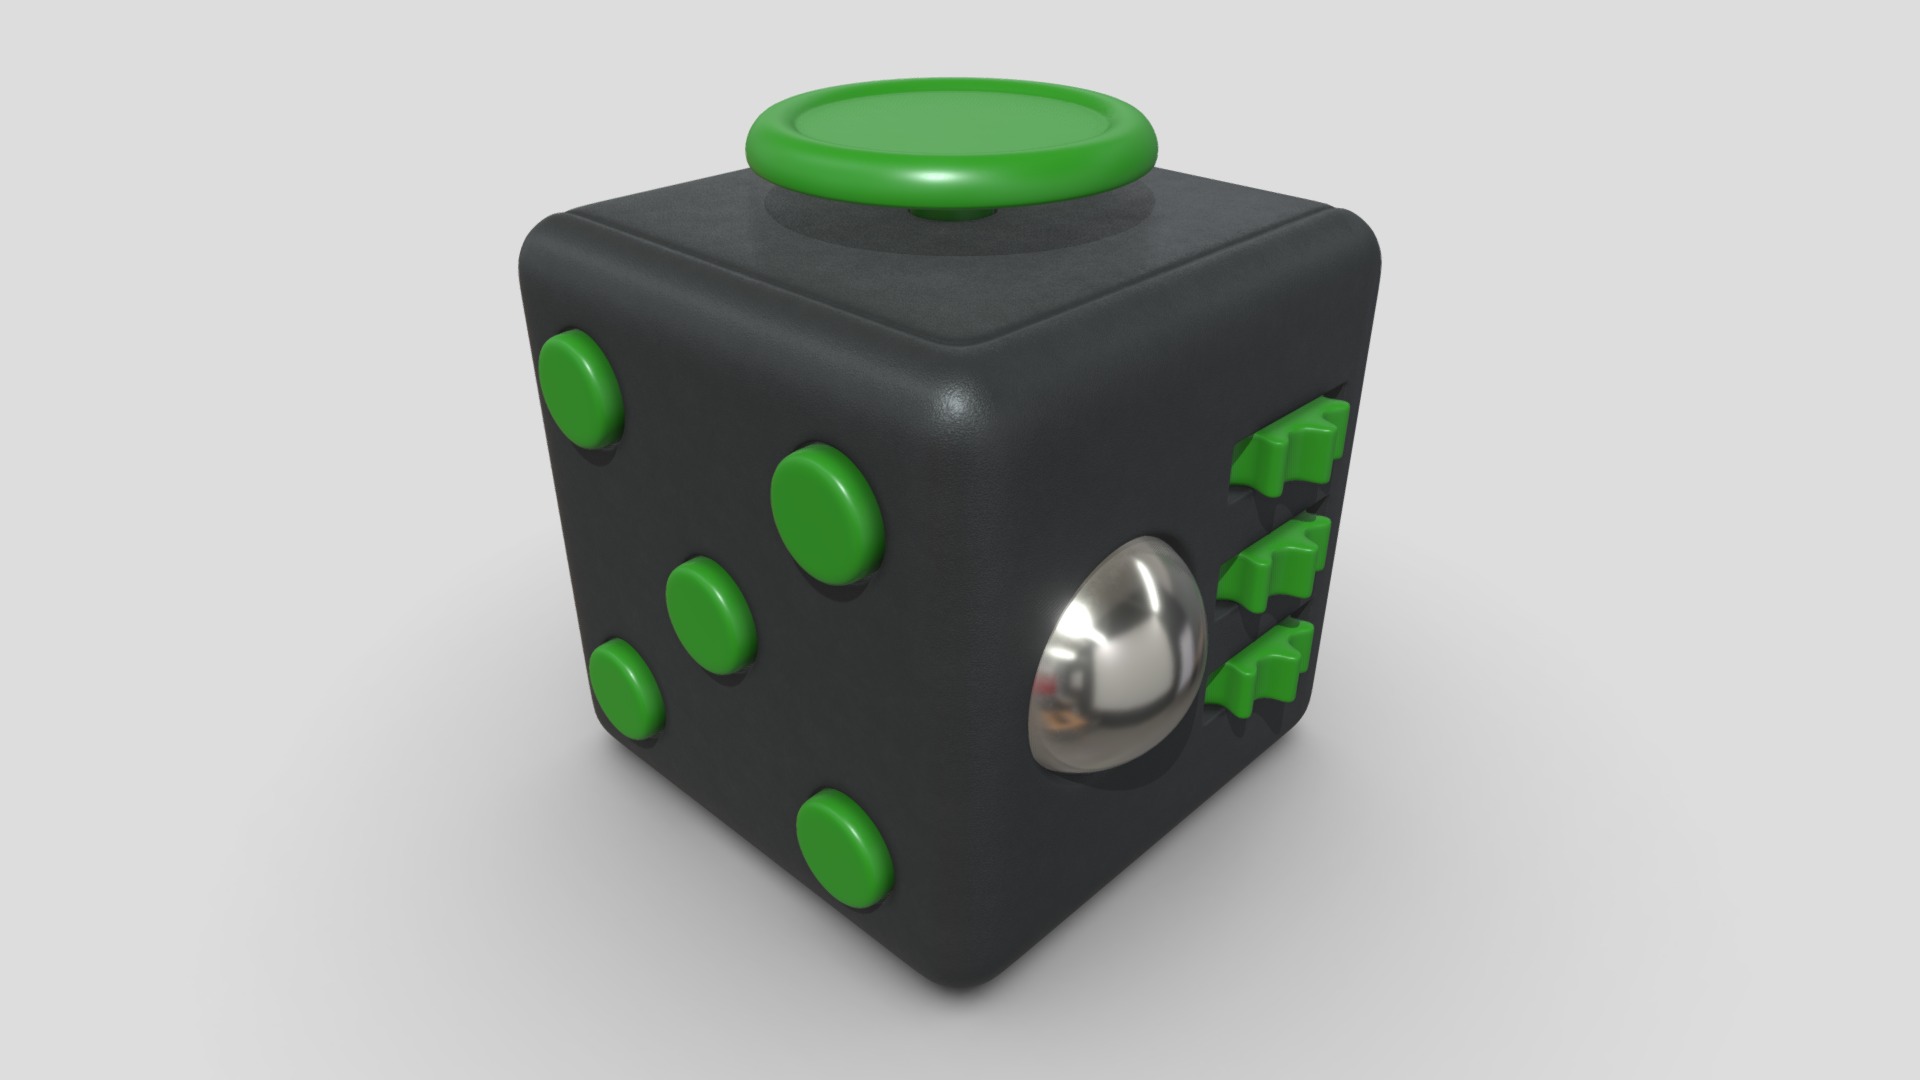 3D model Fidget Cube "Subdiv" - This is a 3D model of the Fidget Cube "Subdiv". The 3D model is about a black and green gaming controller.